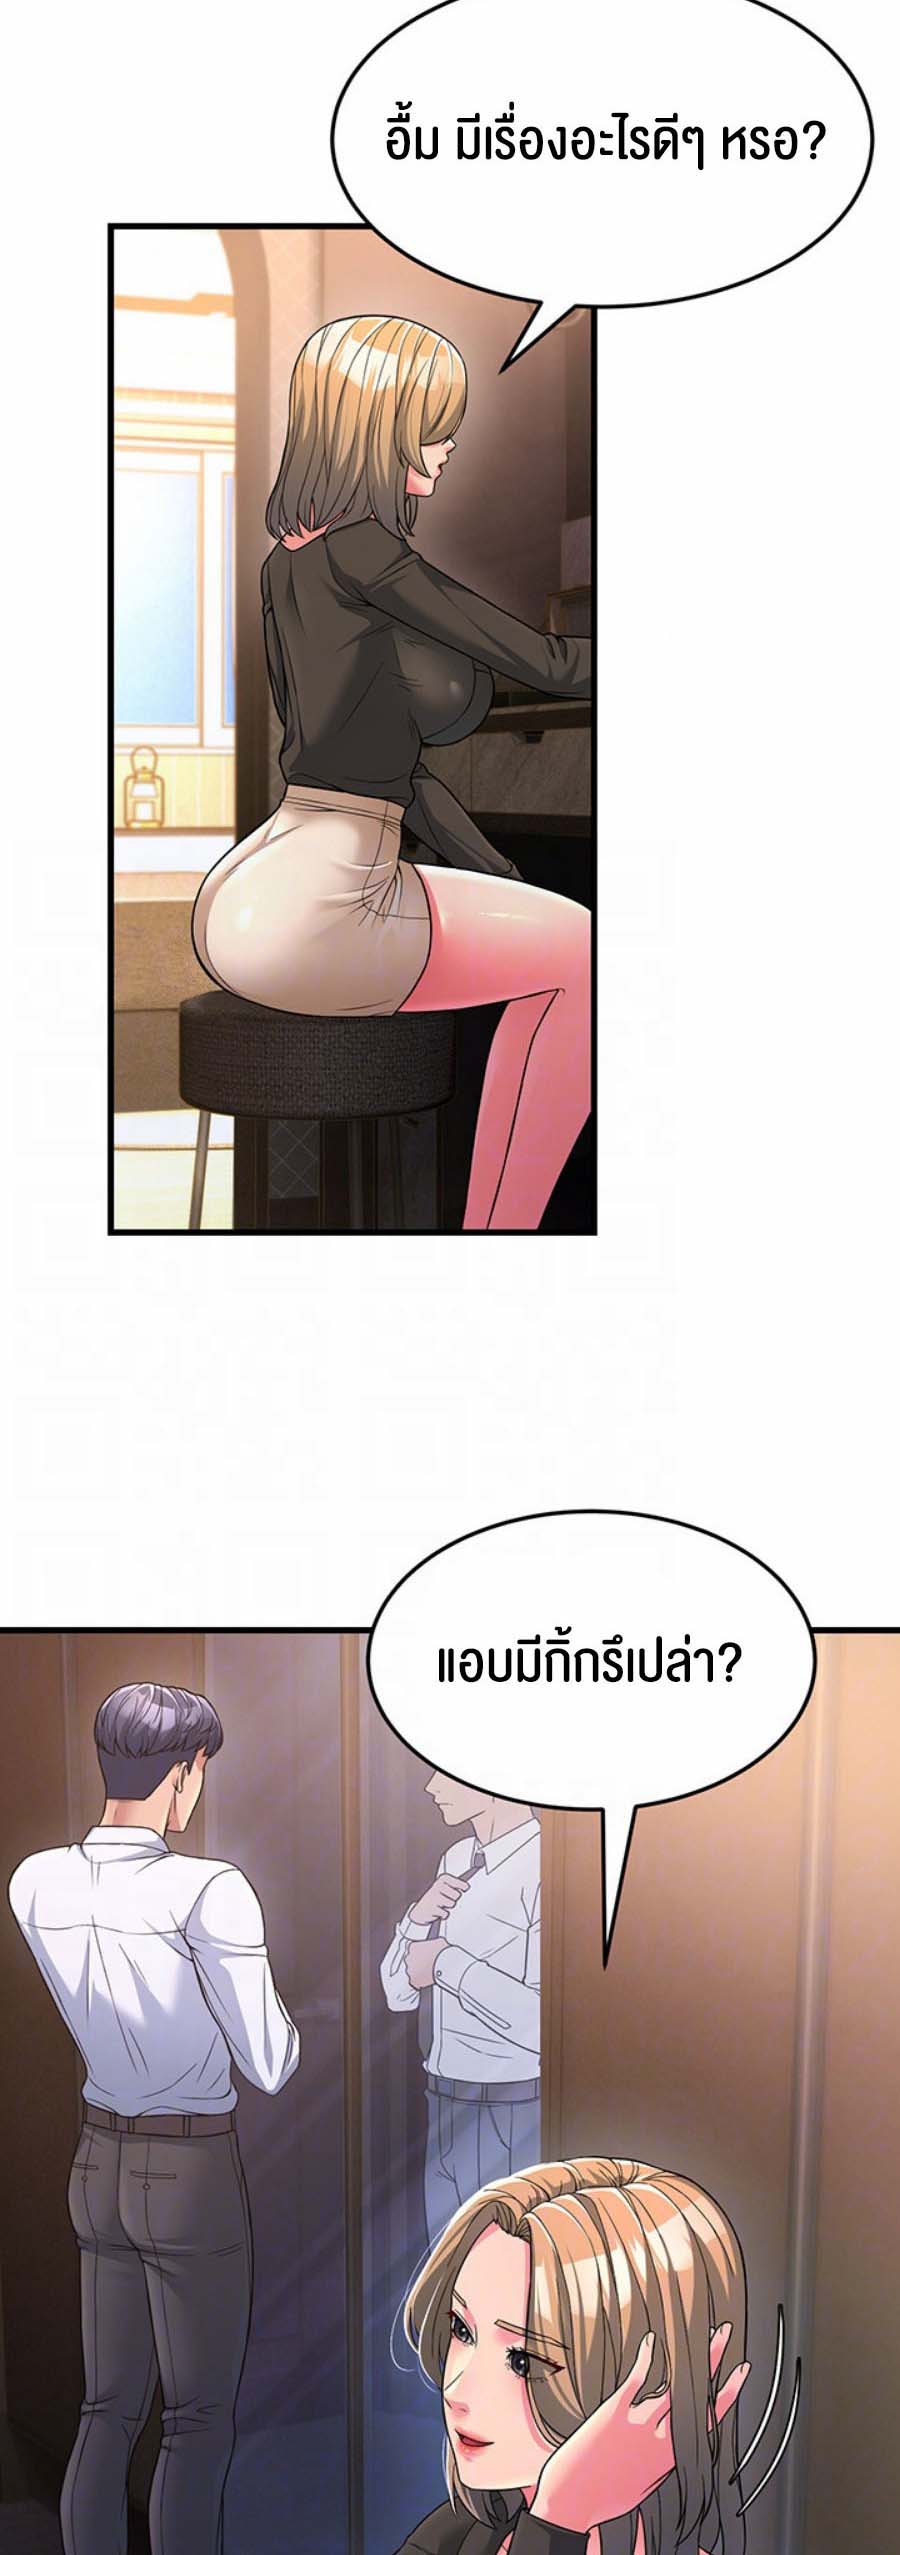 à¸­à¹ˆà¸²à¸™à¹‚à¸”à¸ˆà¸´à¸™ à¹€à¸£à¸·à¹ˆà¸­à¸‡ Mother in Law Bends To My Will 8 16